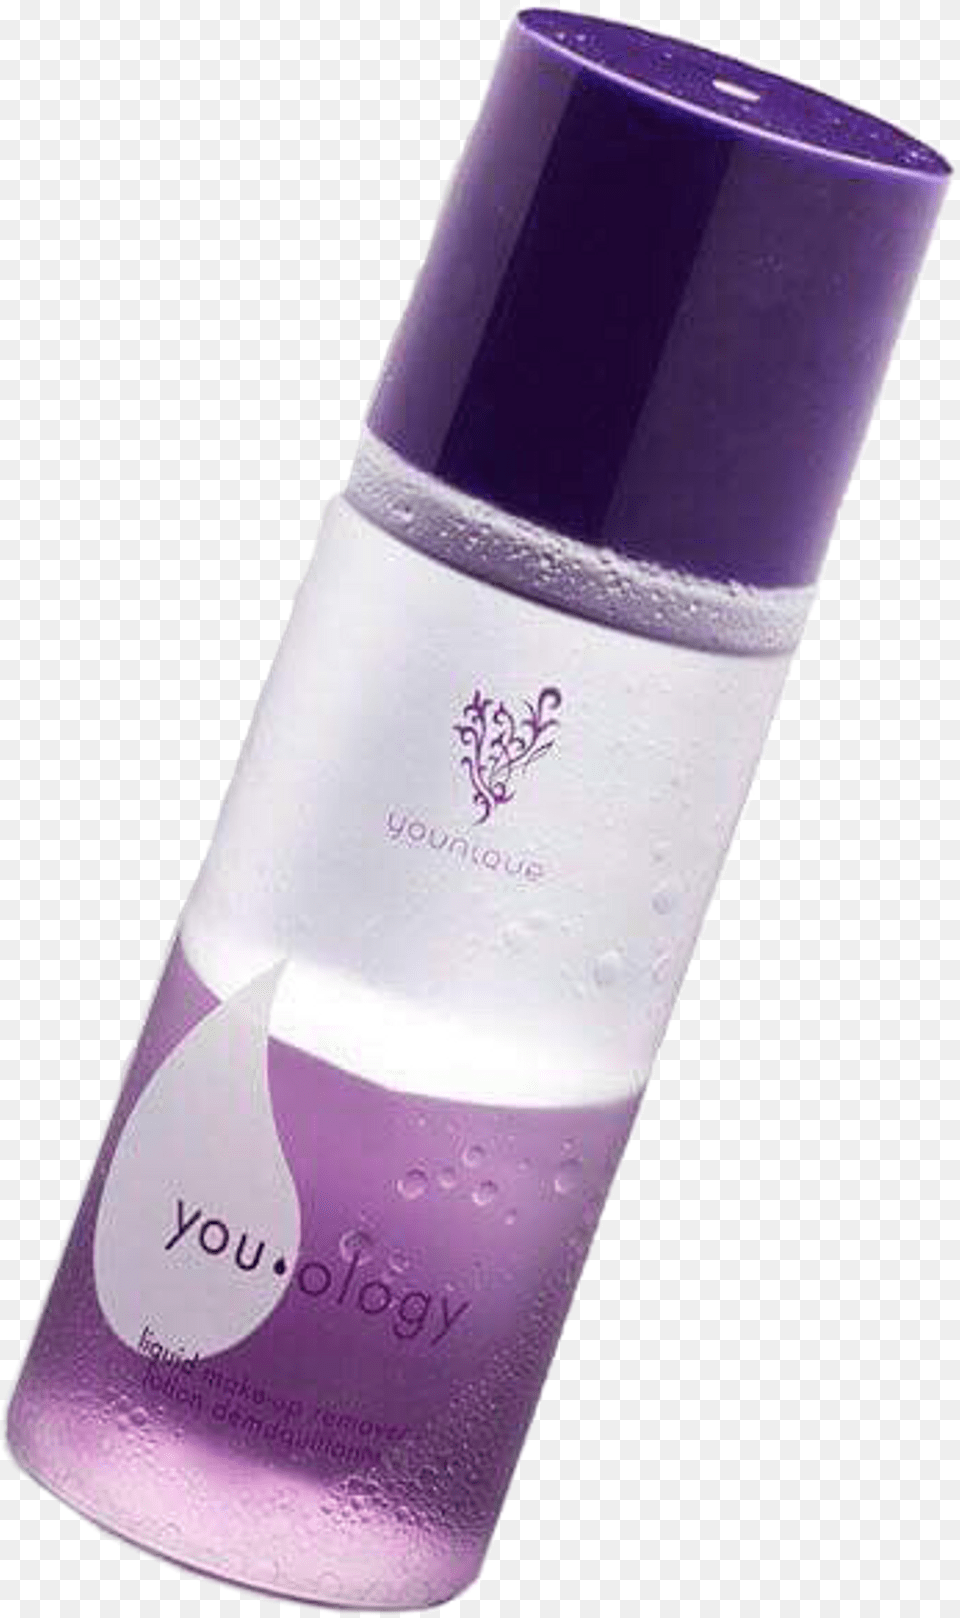 Younique Youology Younique, Purple, Bottle, Cosmetics, Shaker Png